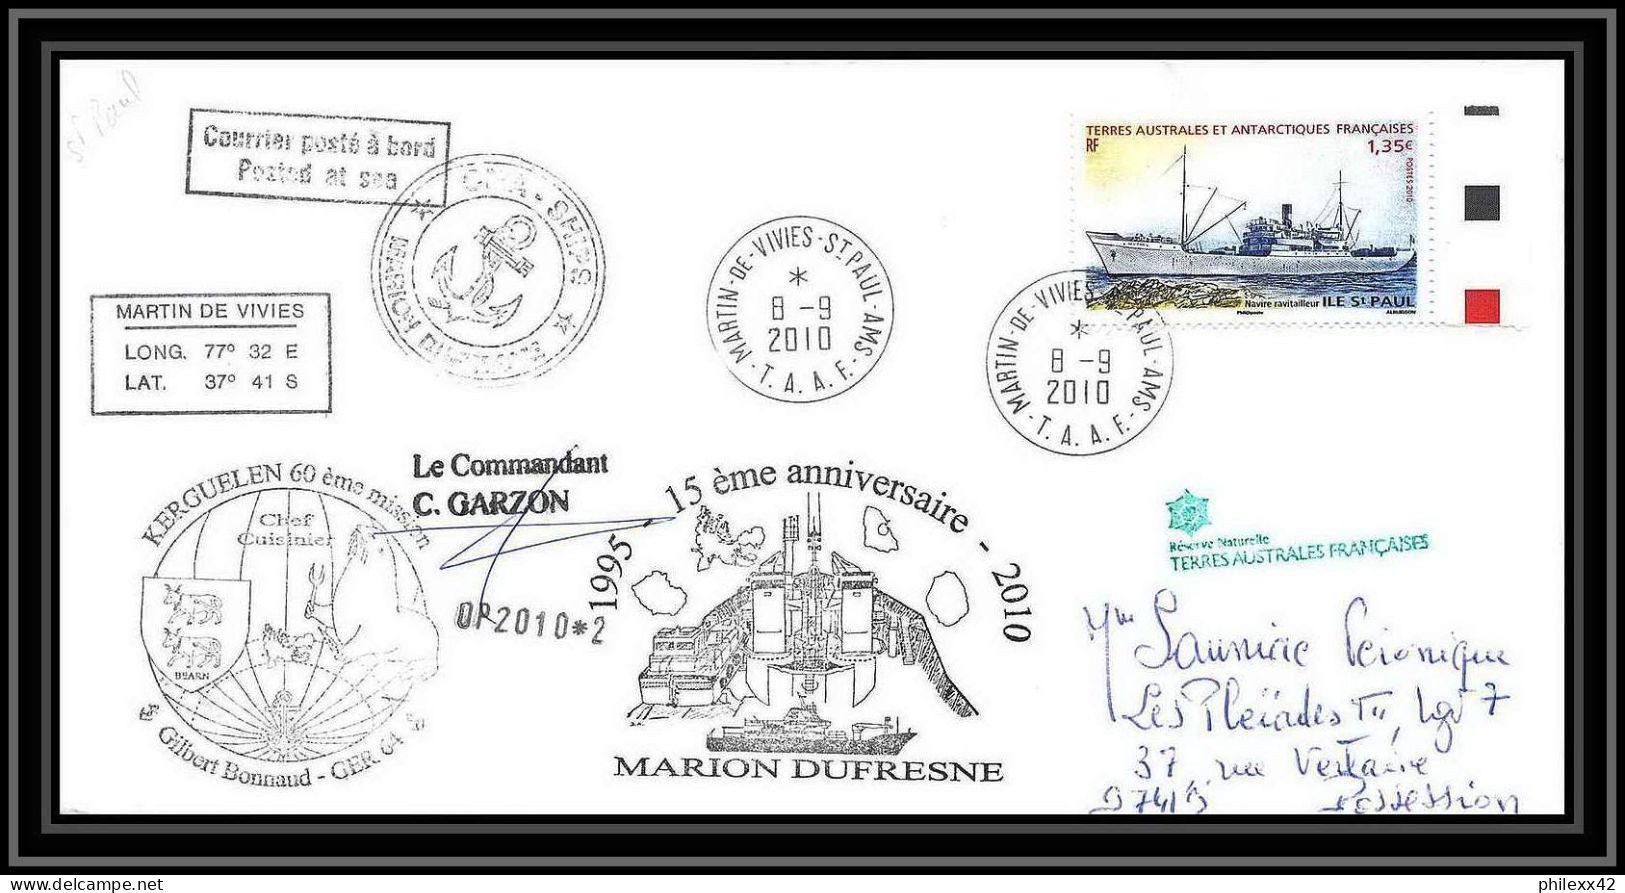 3027 Helilagon Dufresne Signé Signed Op 2010/2 St Paul 8/9/2010 N°558 ANTARCTIC Terres Australes (taaf) Lettre Cover - Elicotteri